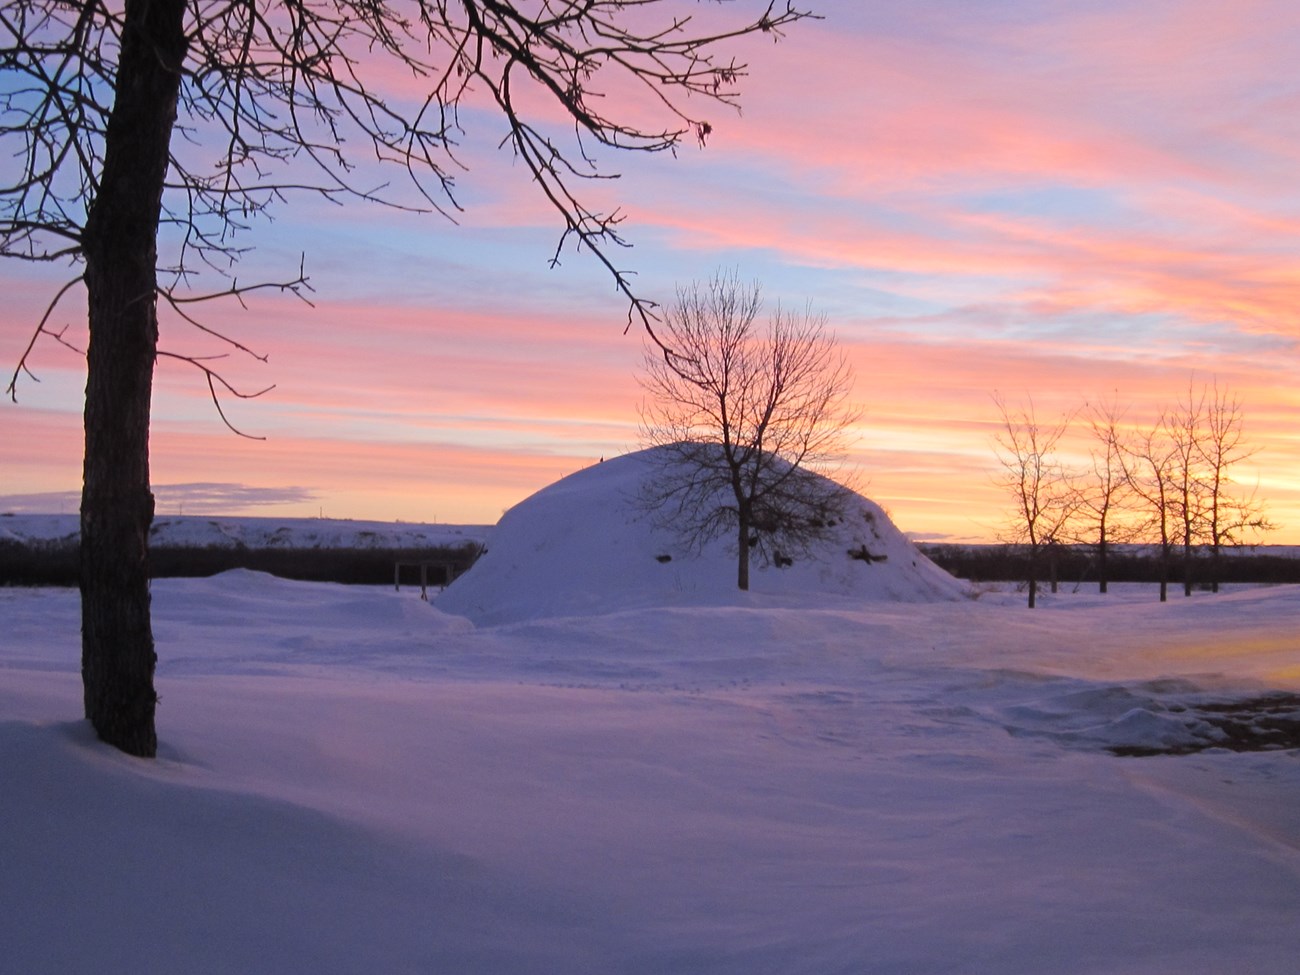 An earthlodge covered in snow with a colorful sky above.